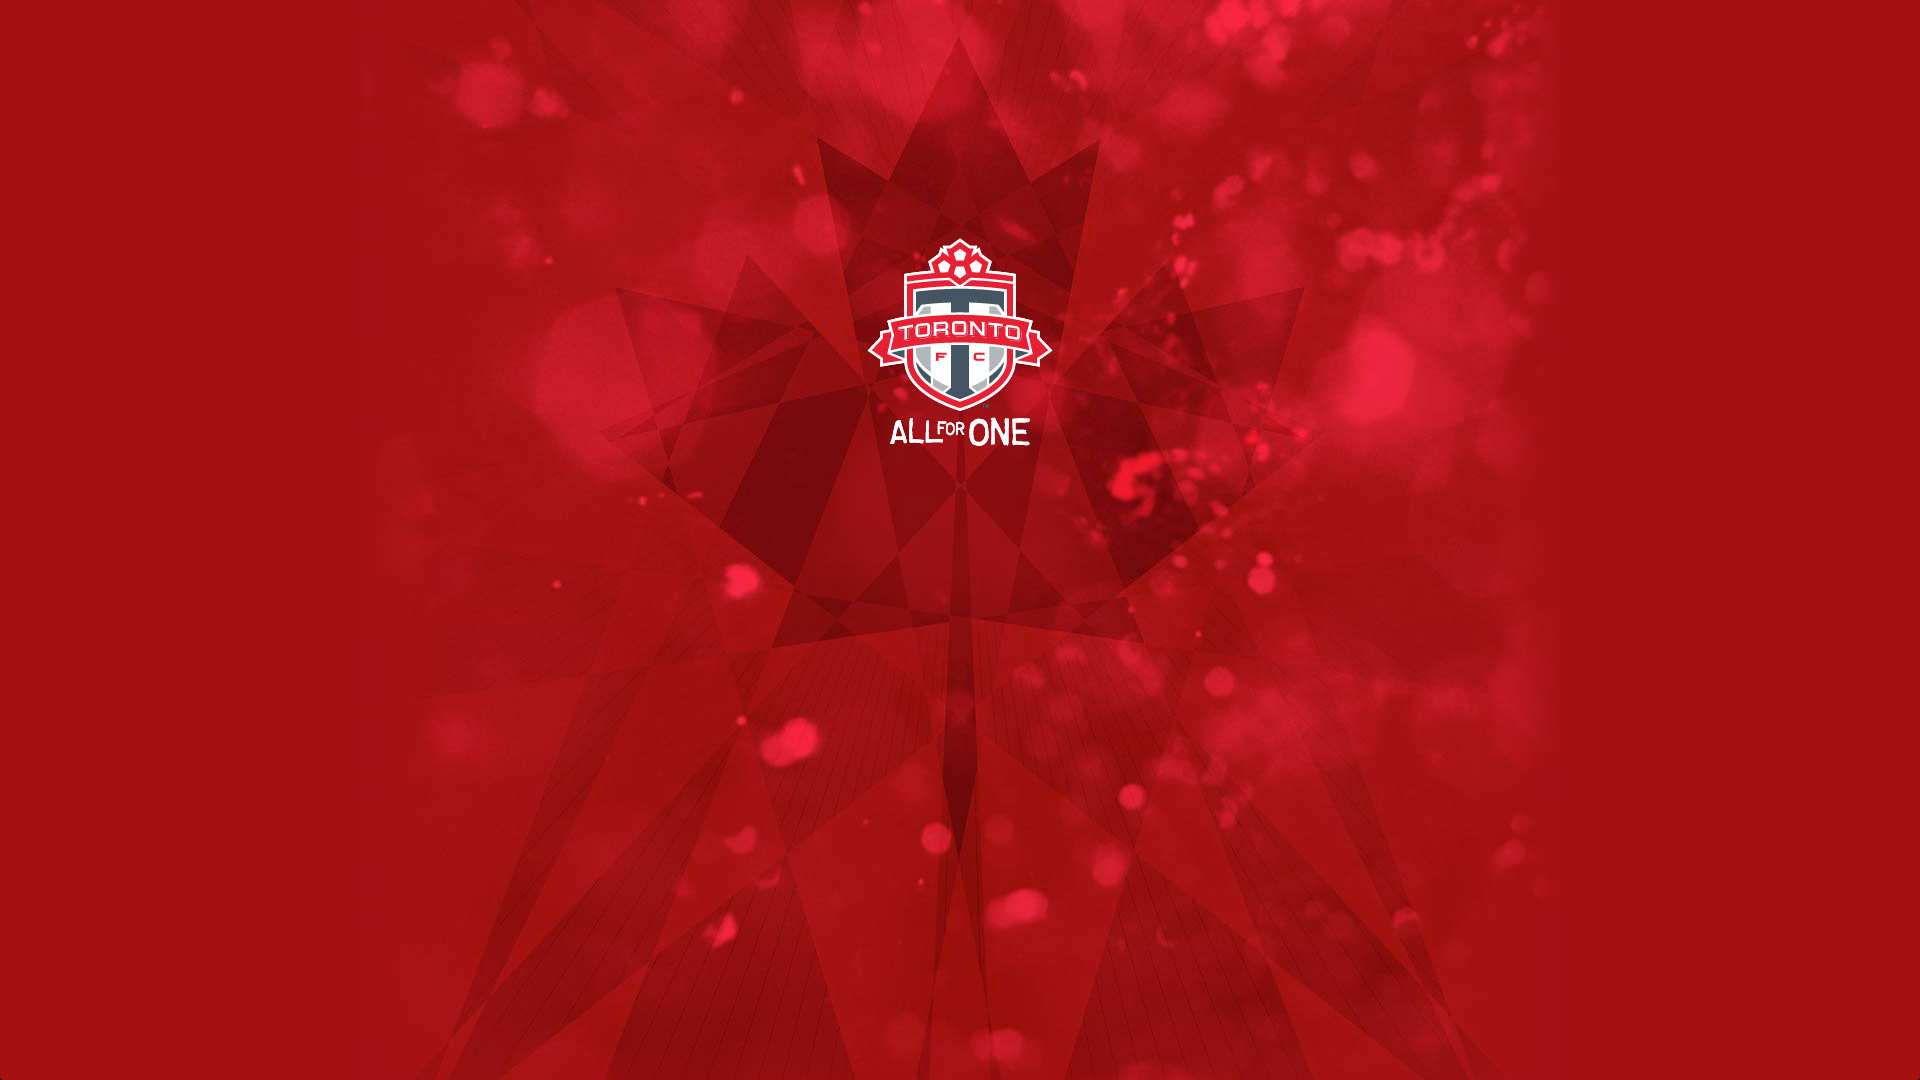 Tfc All For One Wallpaper HD